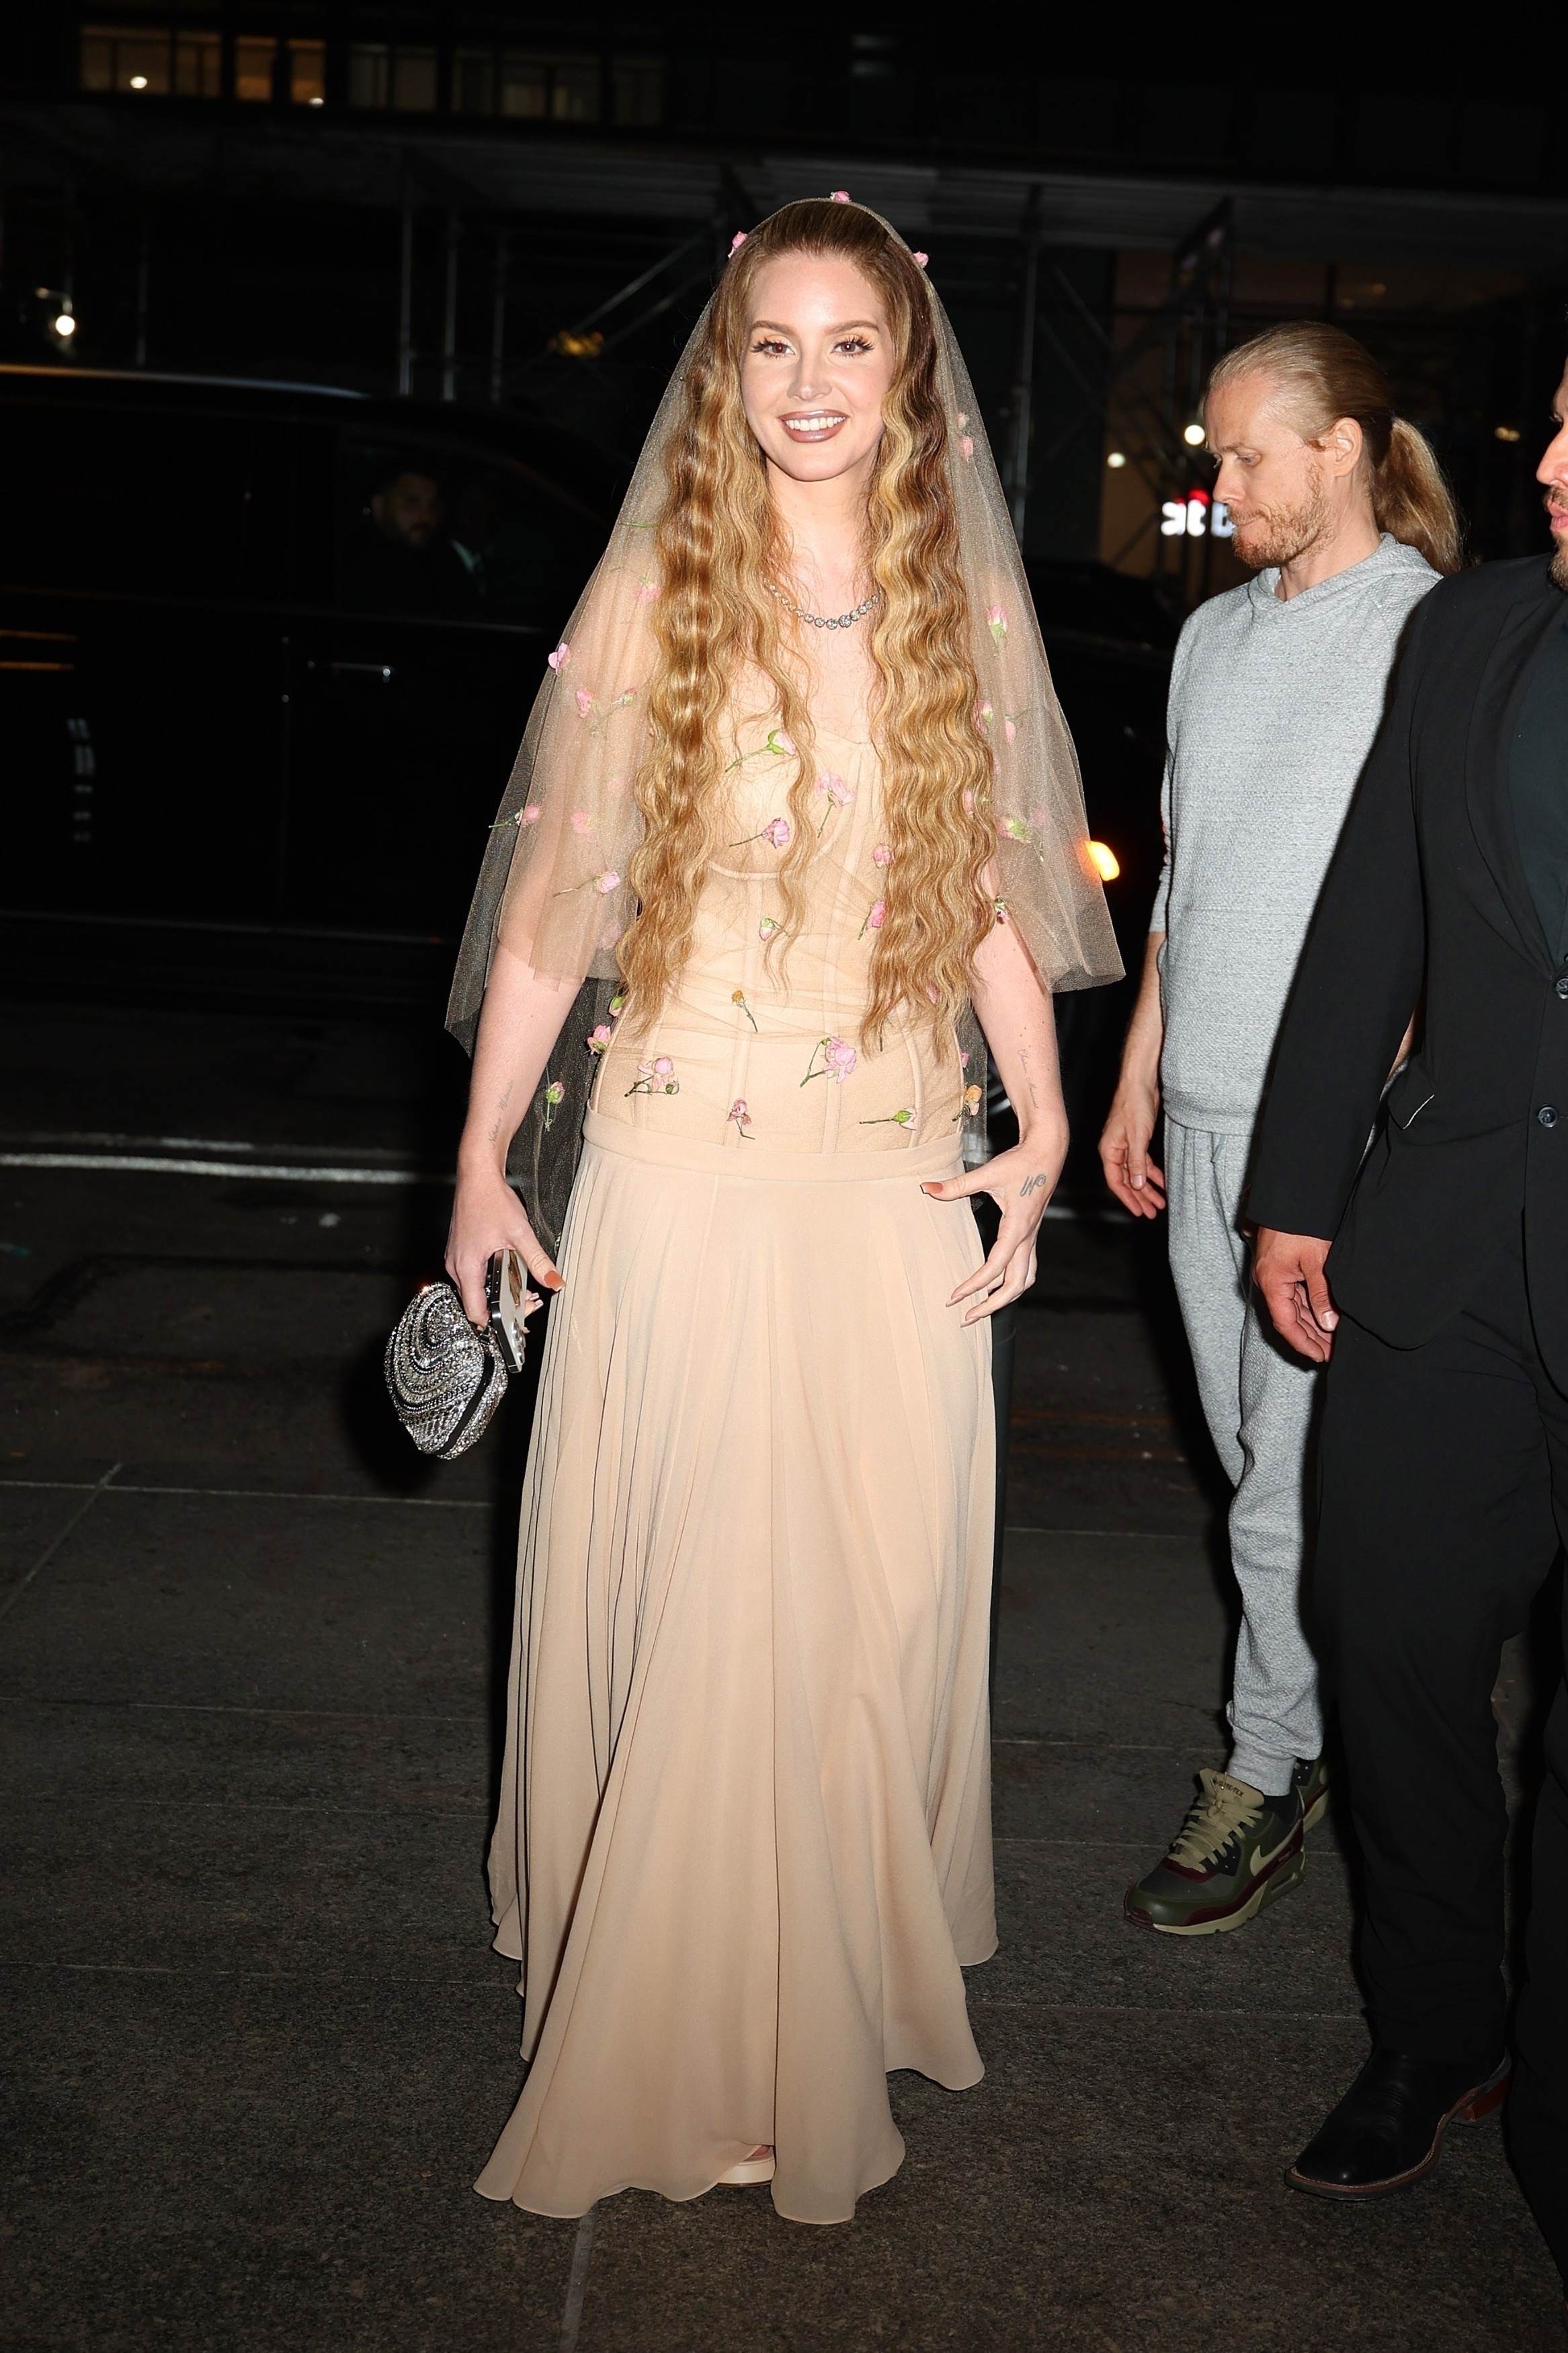 A woman with long wavy hair wearing a floor-length sheer dress with embellishments. Two persons visible in background